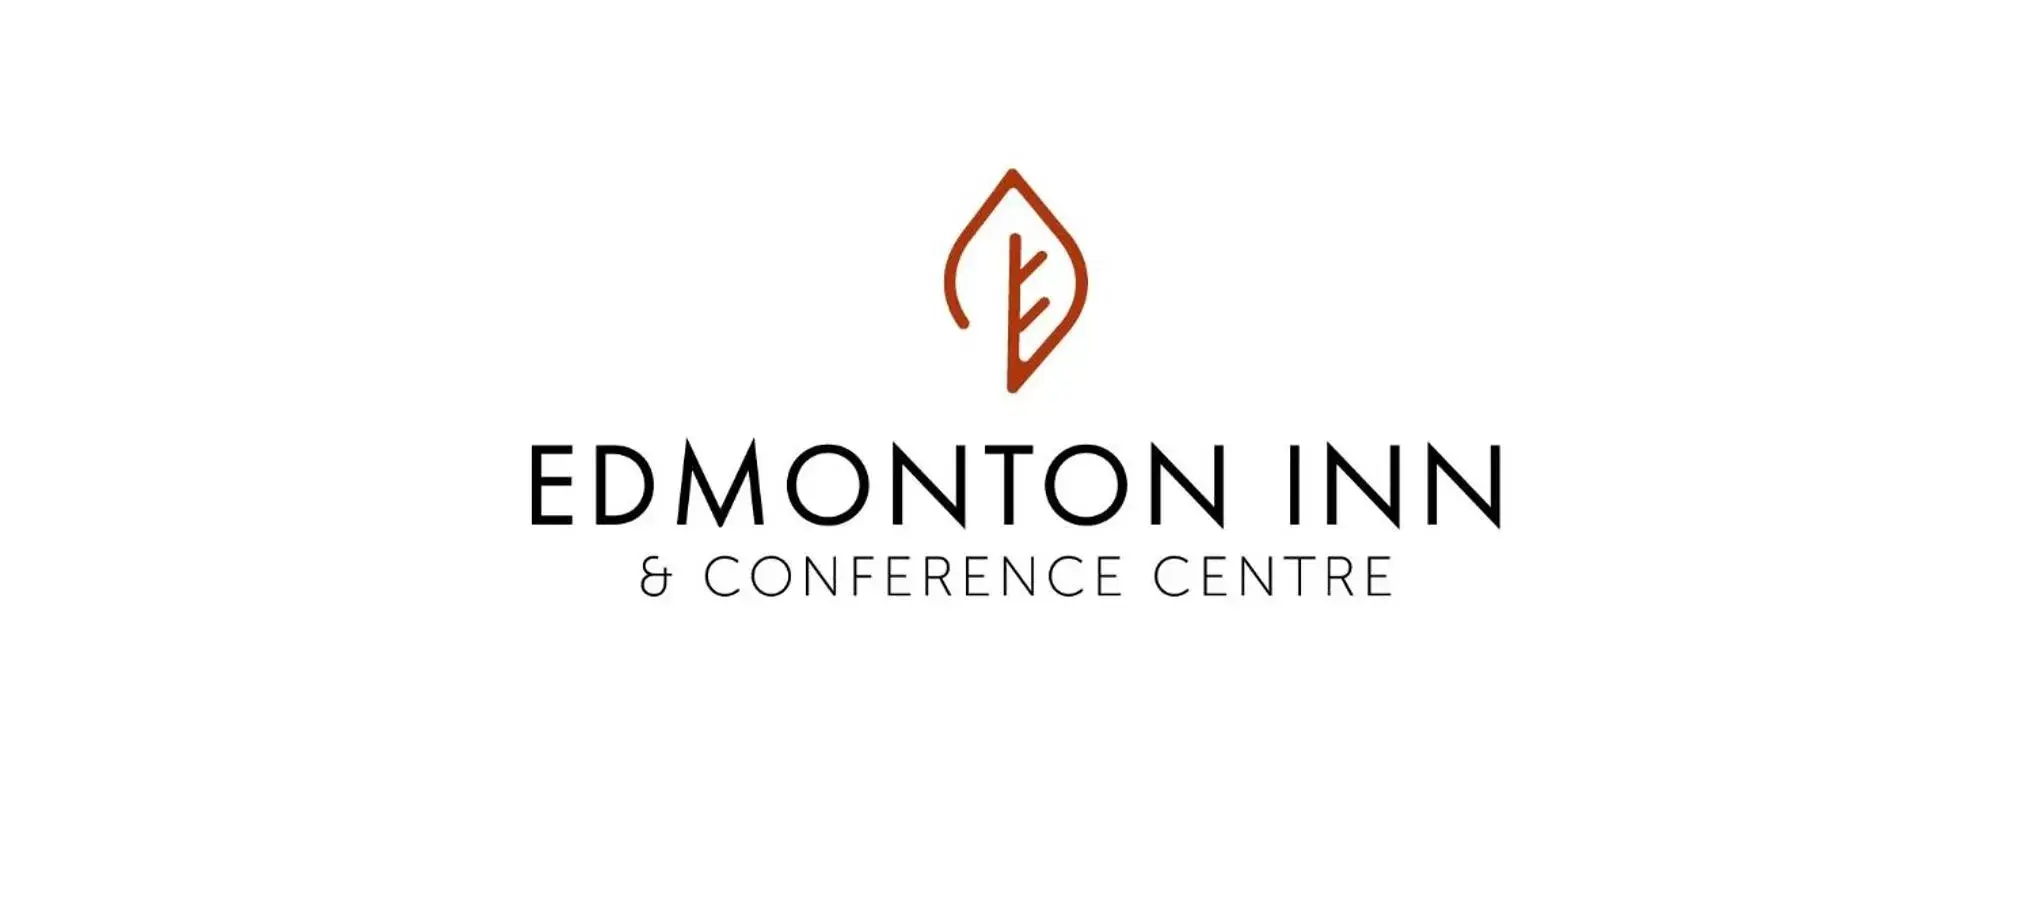 Property Logo/Sign in Edmonton Inn and Conference Centre